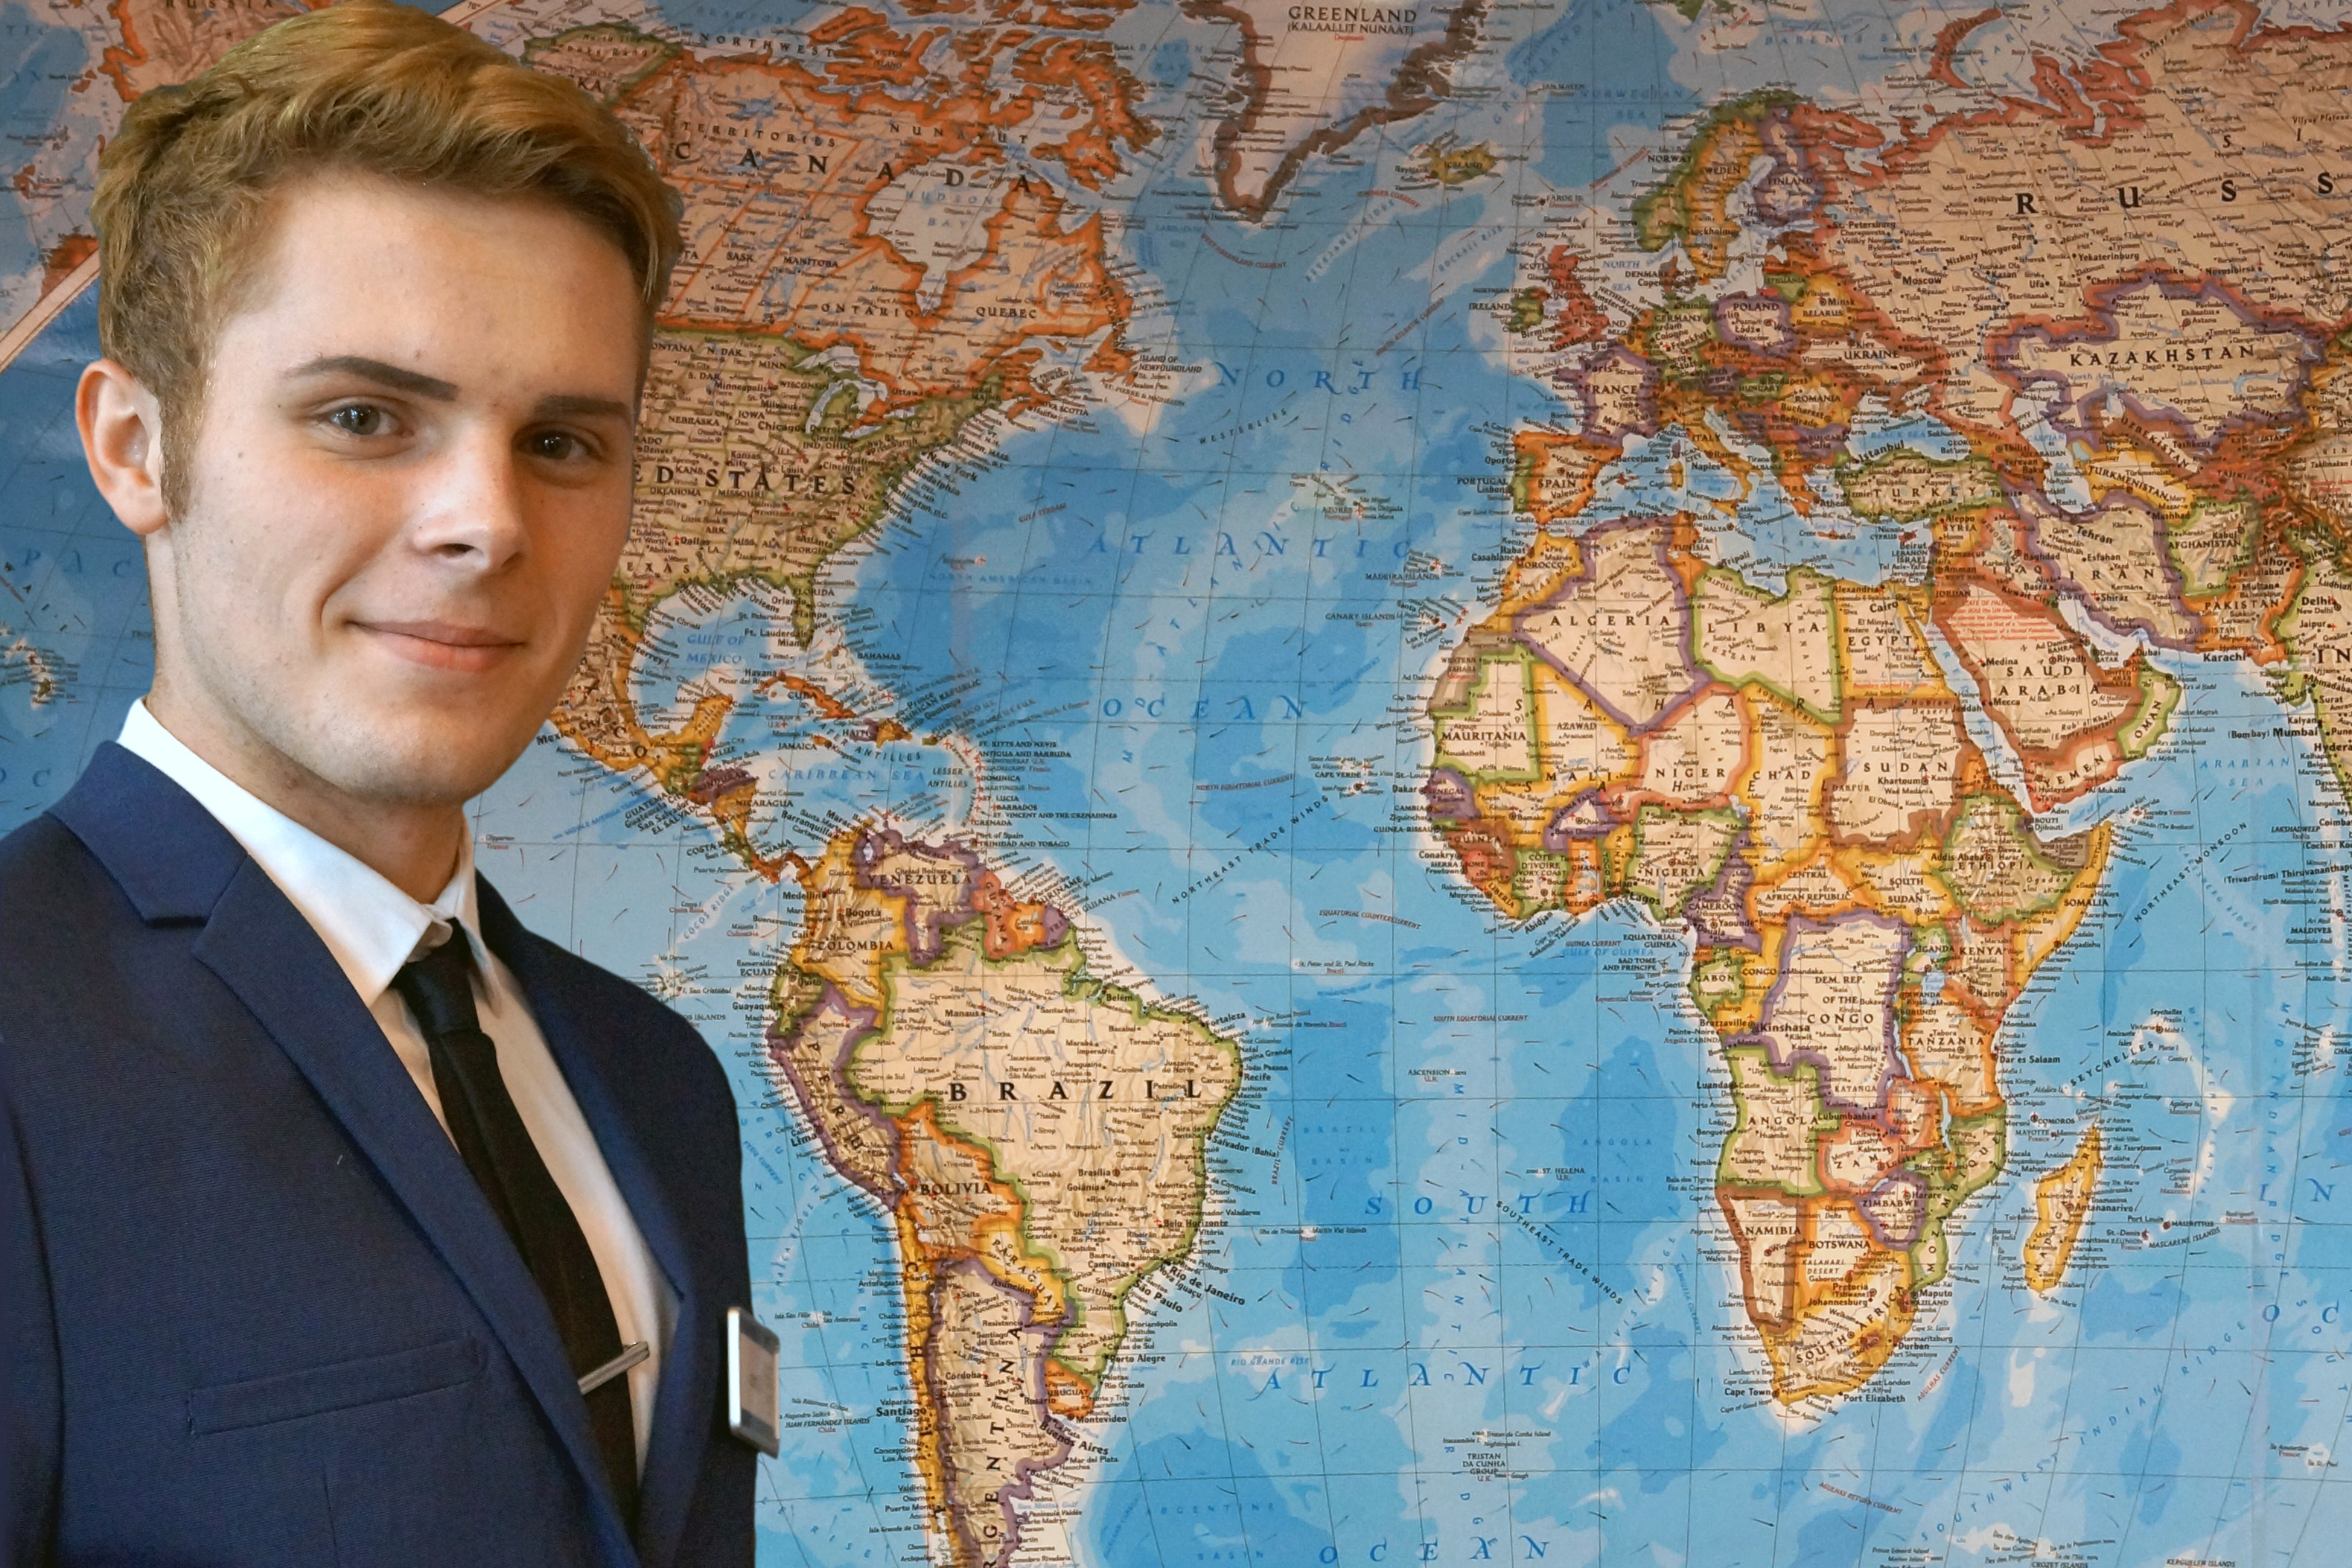 STUDENT IN UNIFORM IN FRONT OF WORLD MAP